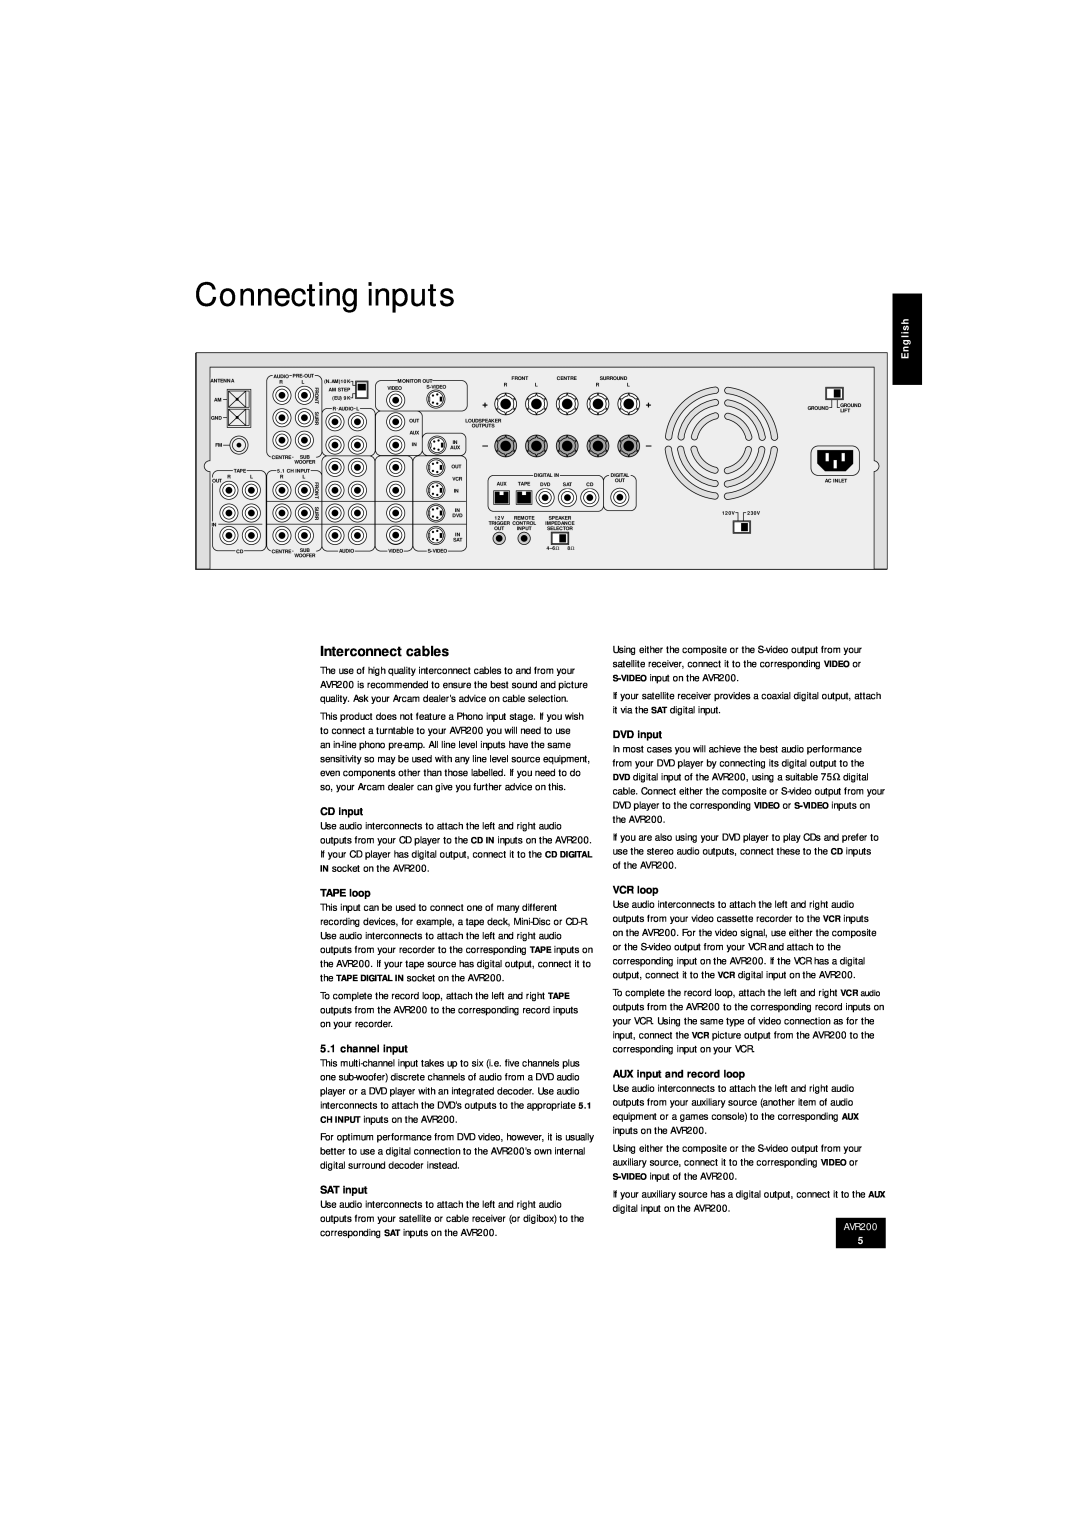 Arcam AVR200 Connecting inputs, Interconnect cables, CD input, DVD input, TAPE loop, channel input, SAT input, VCR loop 